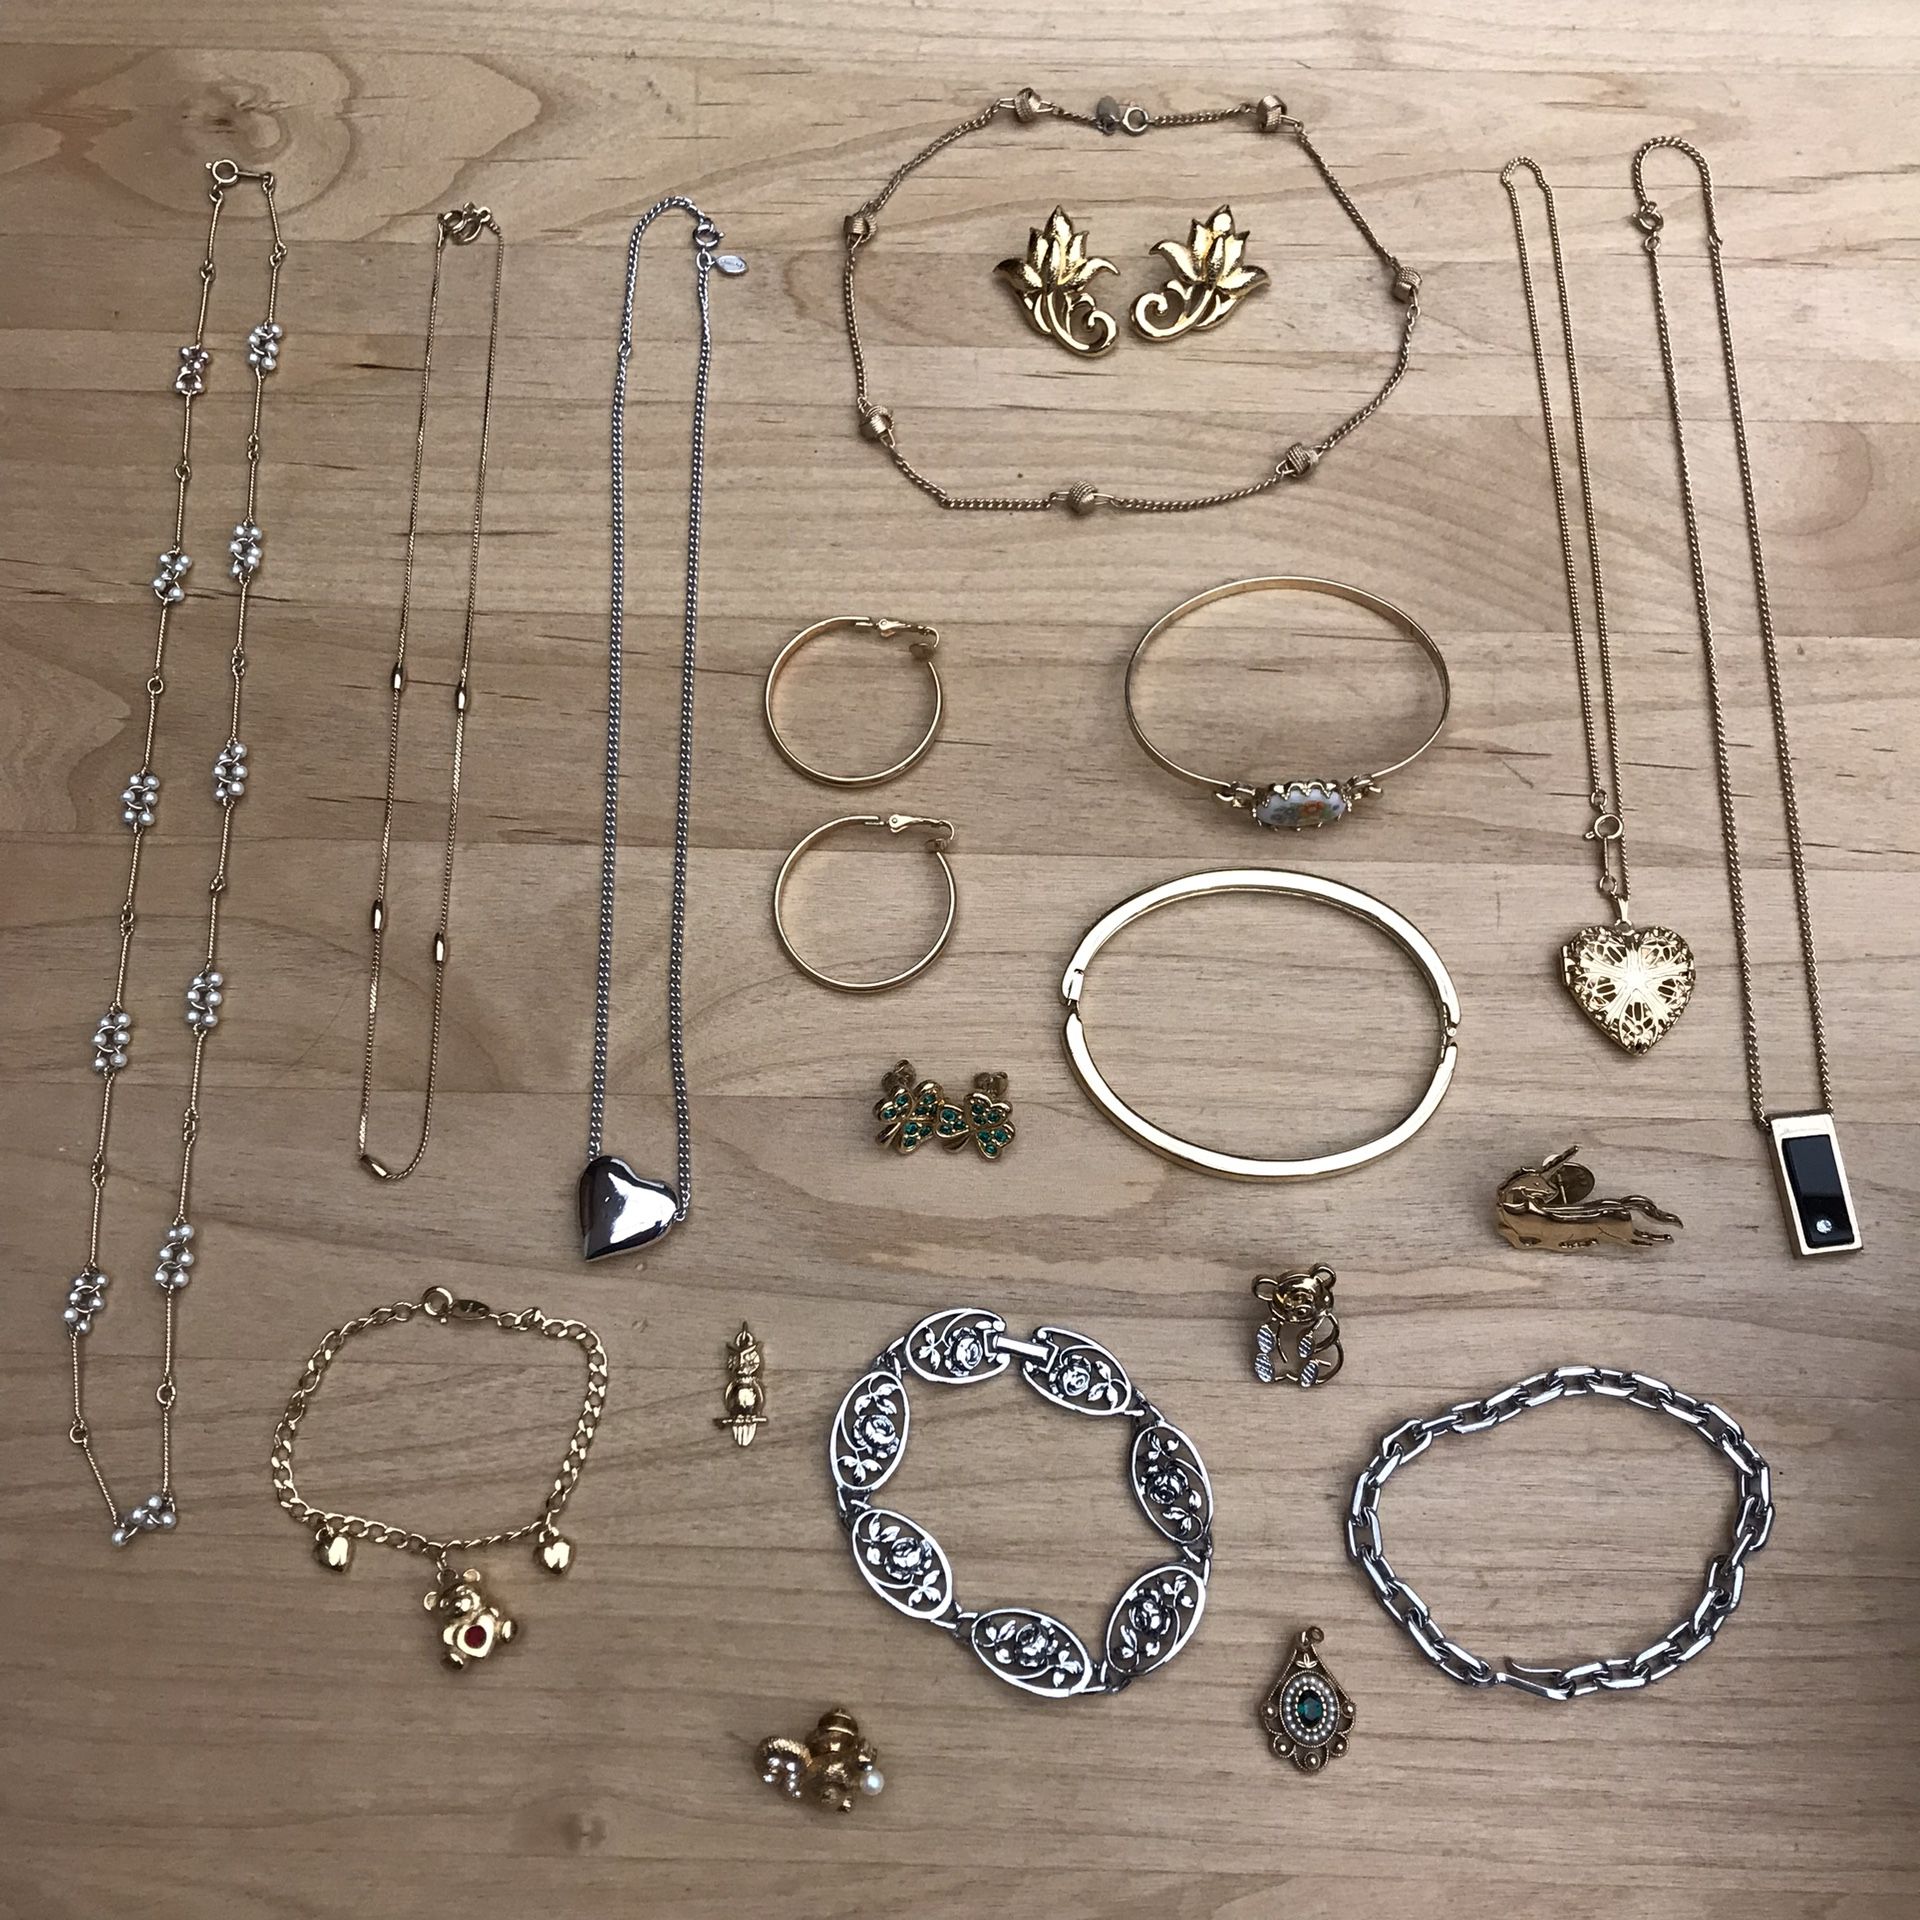 19-Piece Avon Signature Jewelry Lot - Necklaces, Bracelets, Earrings, Pins, Charms